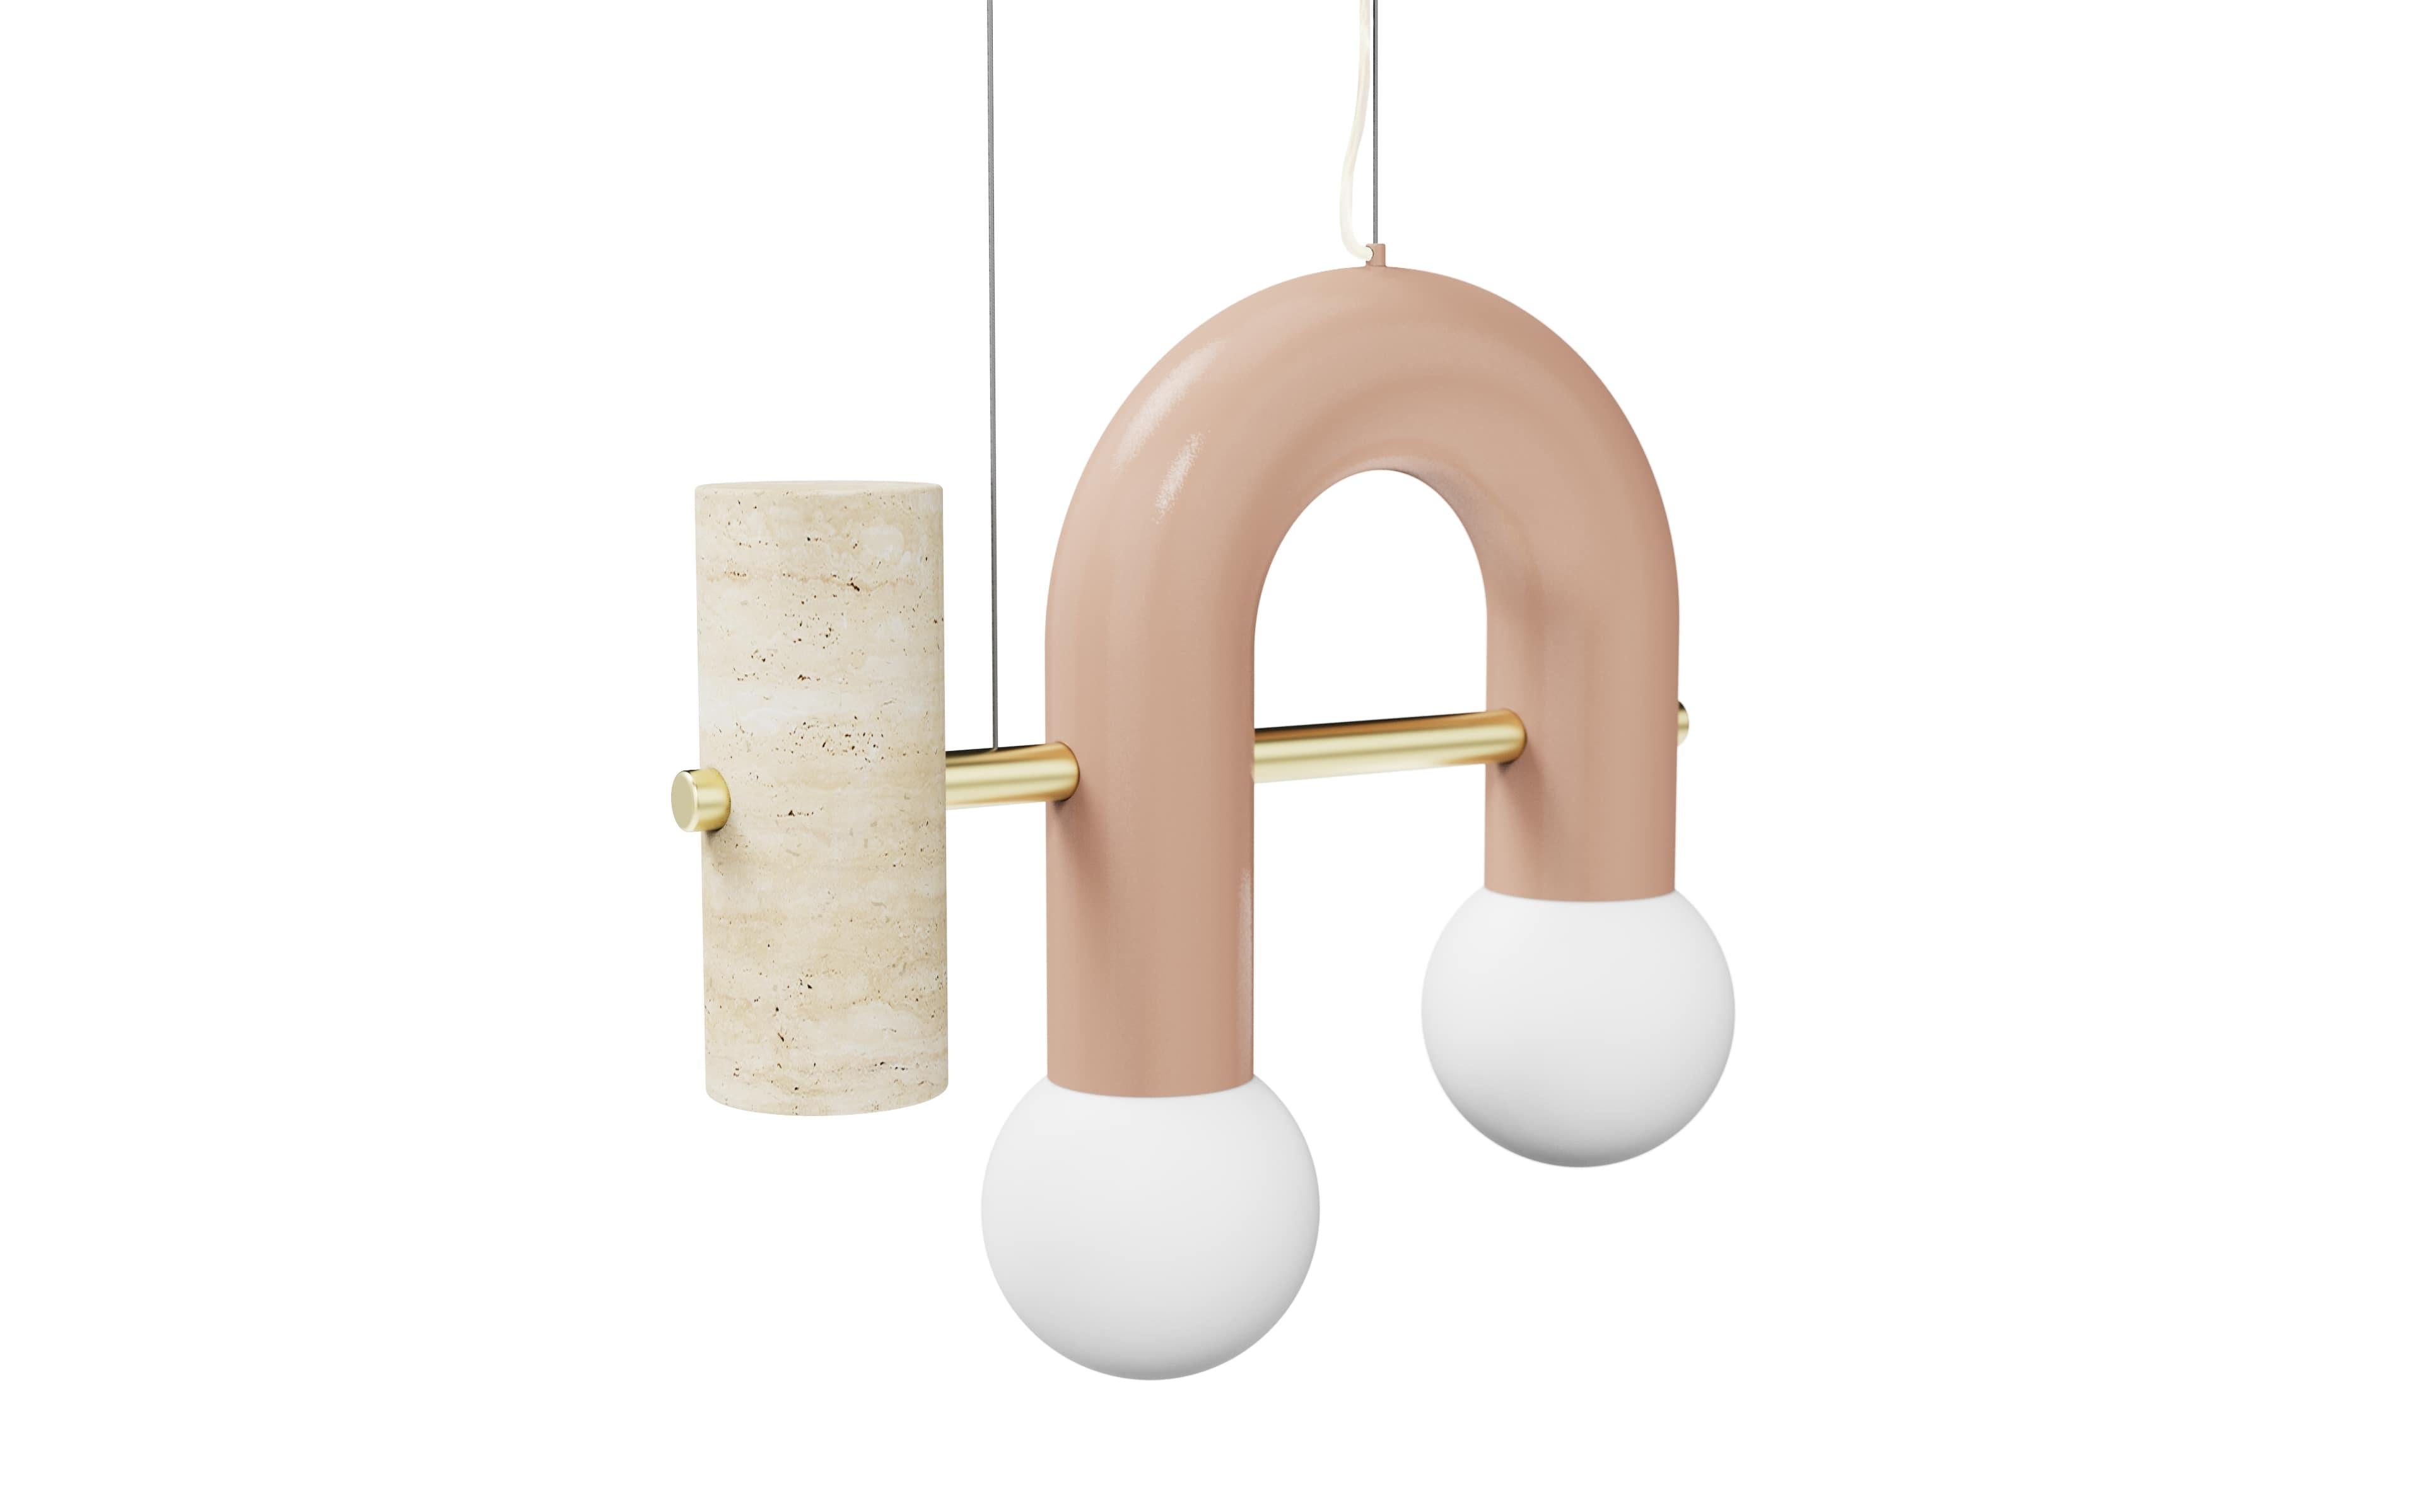 Pyppe single III lamp by Utu Lamps
Dimensions: 39 x 40 x 12 cm
Materials: Lacquered metal, Brass, Nickel/Copper, Travertine

All our lamps can be wired according to each country. If sold to the USA it will be wired for the USA for instance.

Dooq is